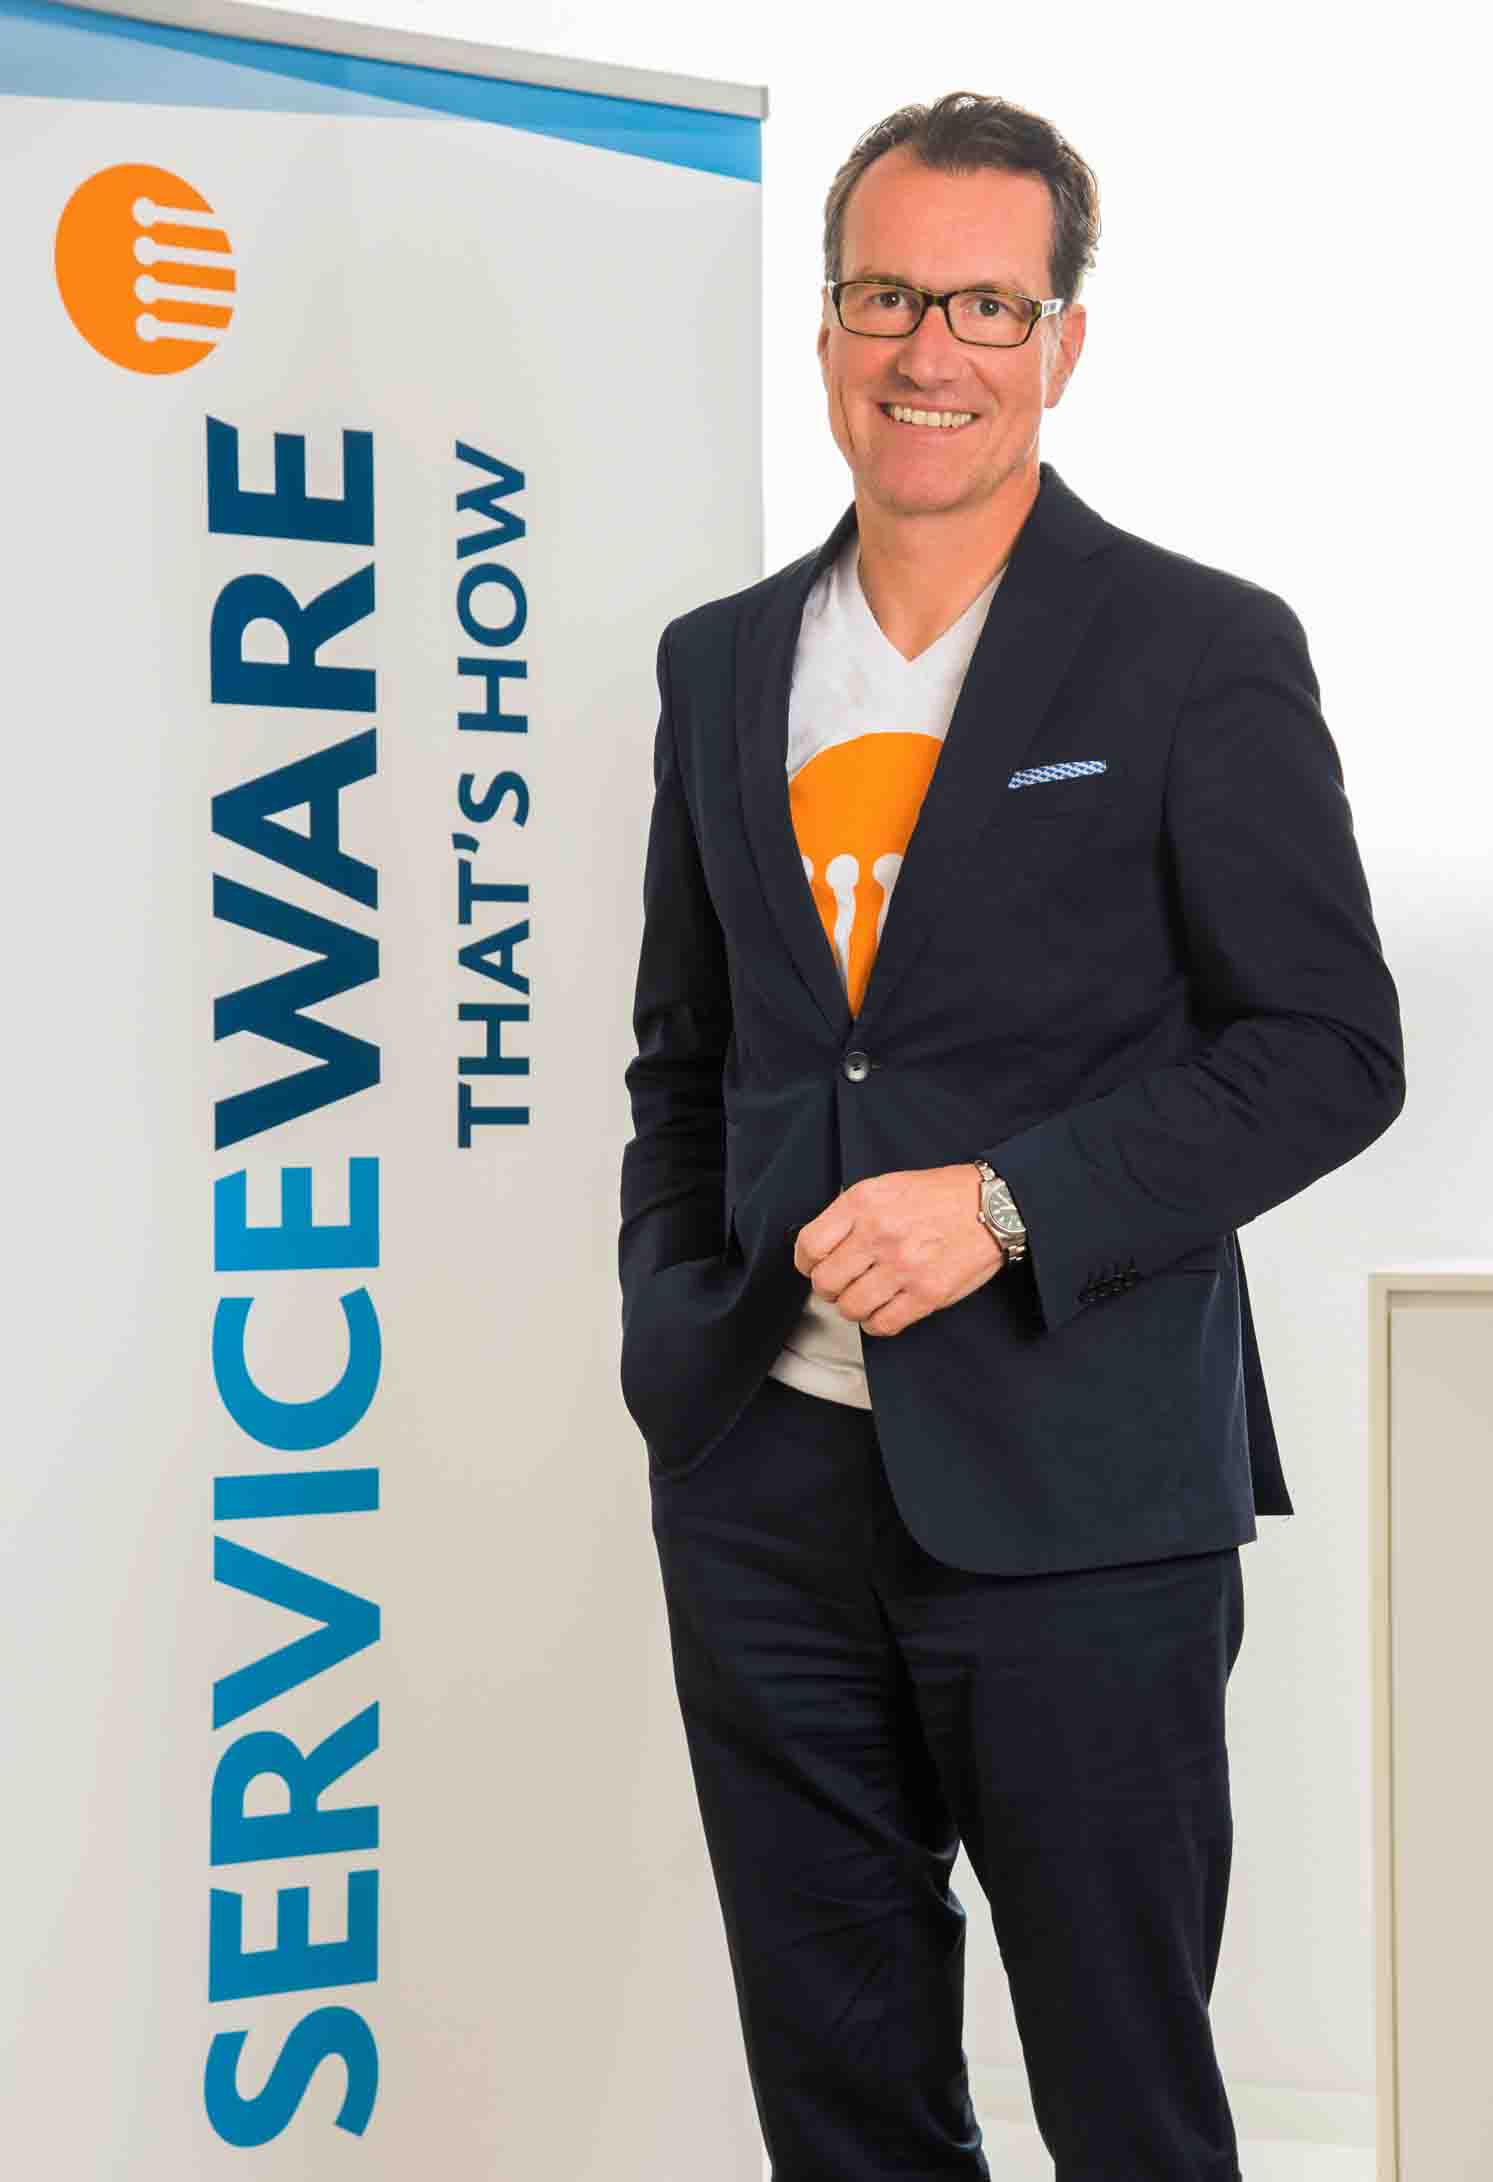 Dirk Martin, CEO and Founder of Serviceware SE